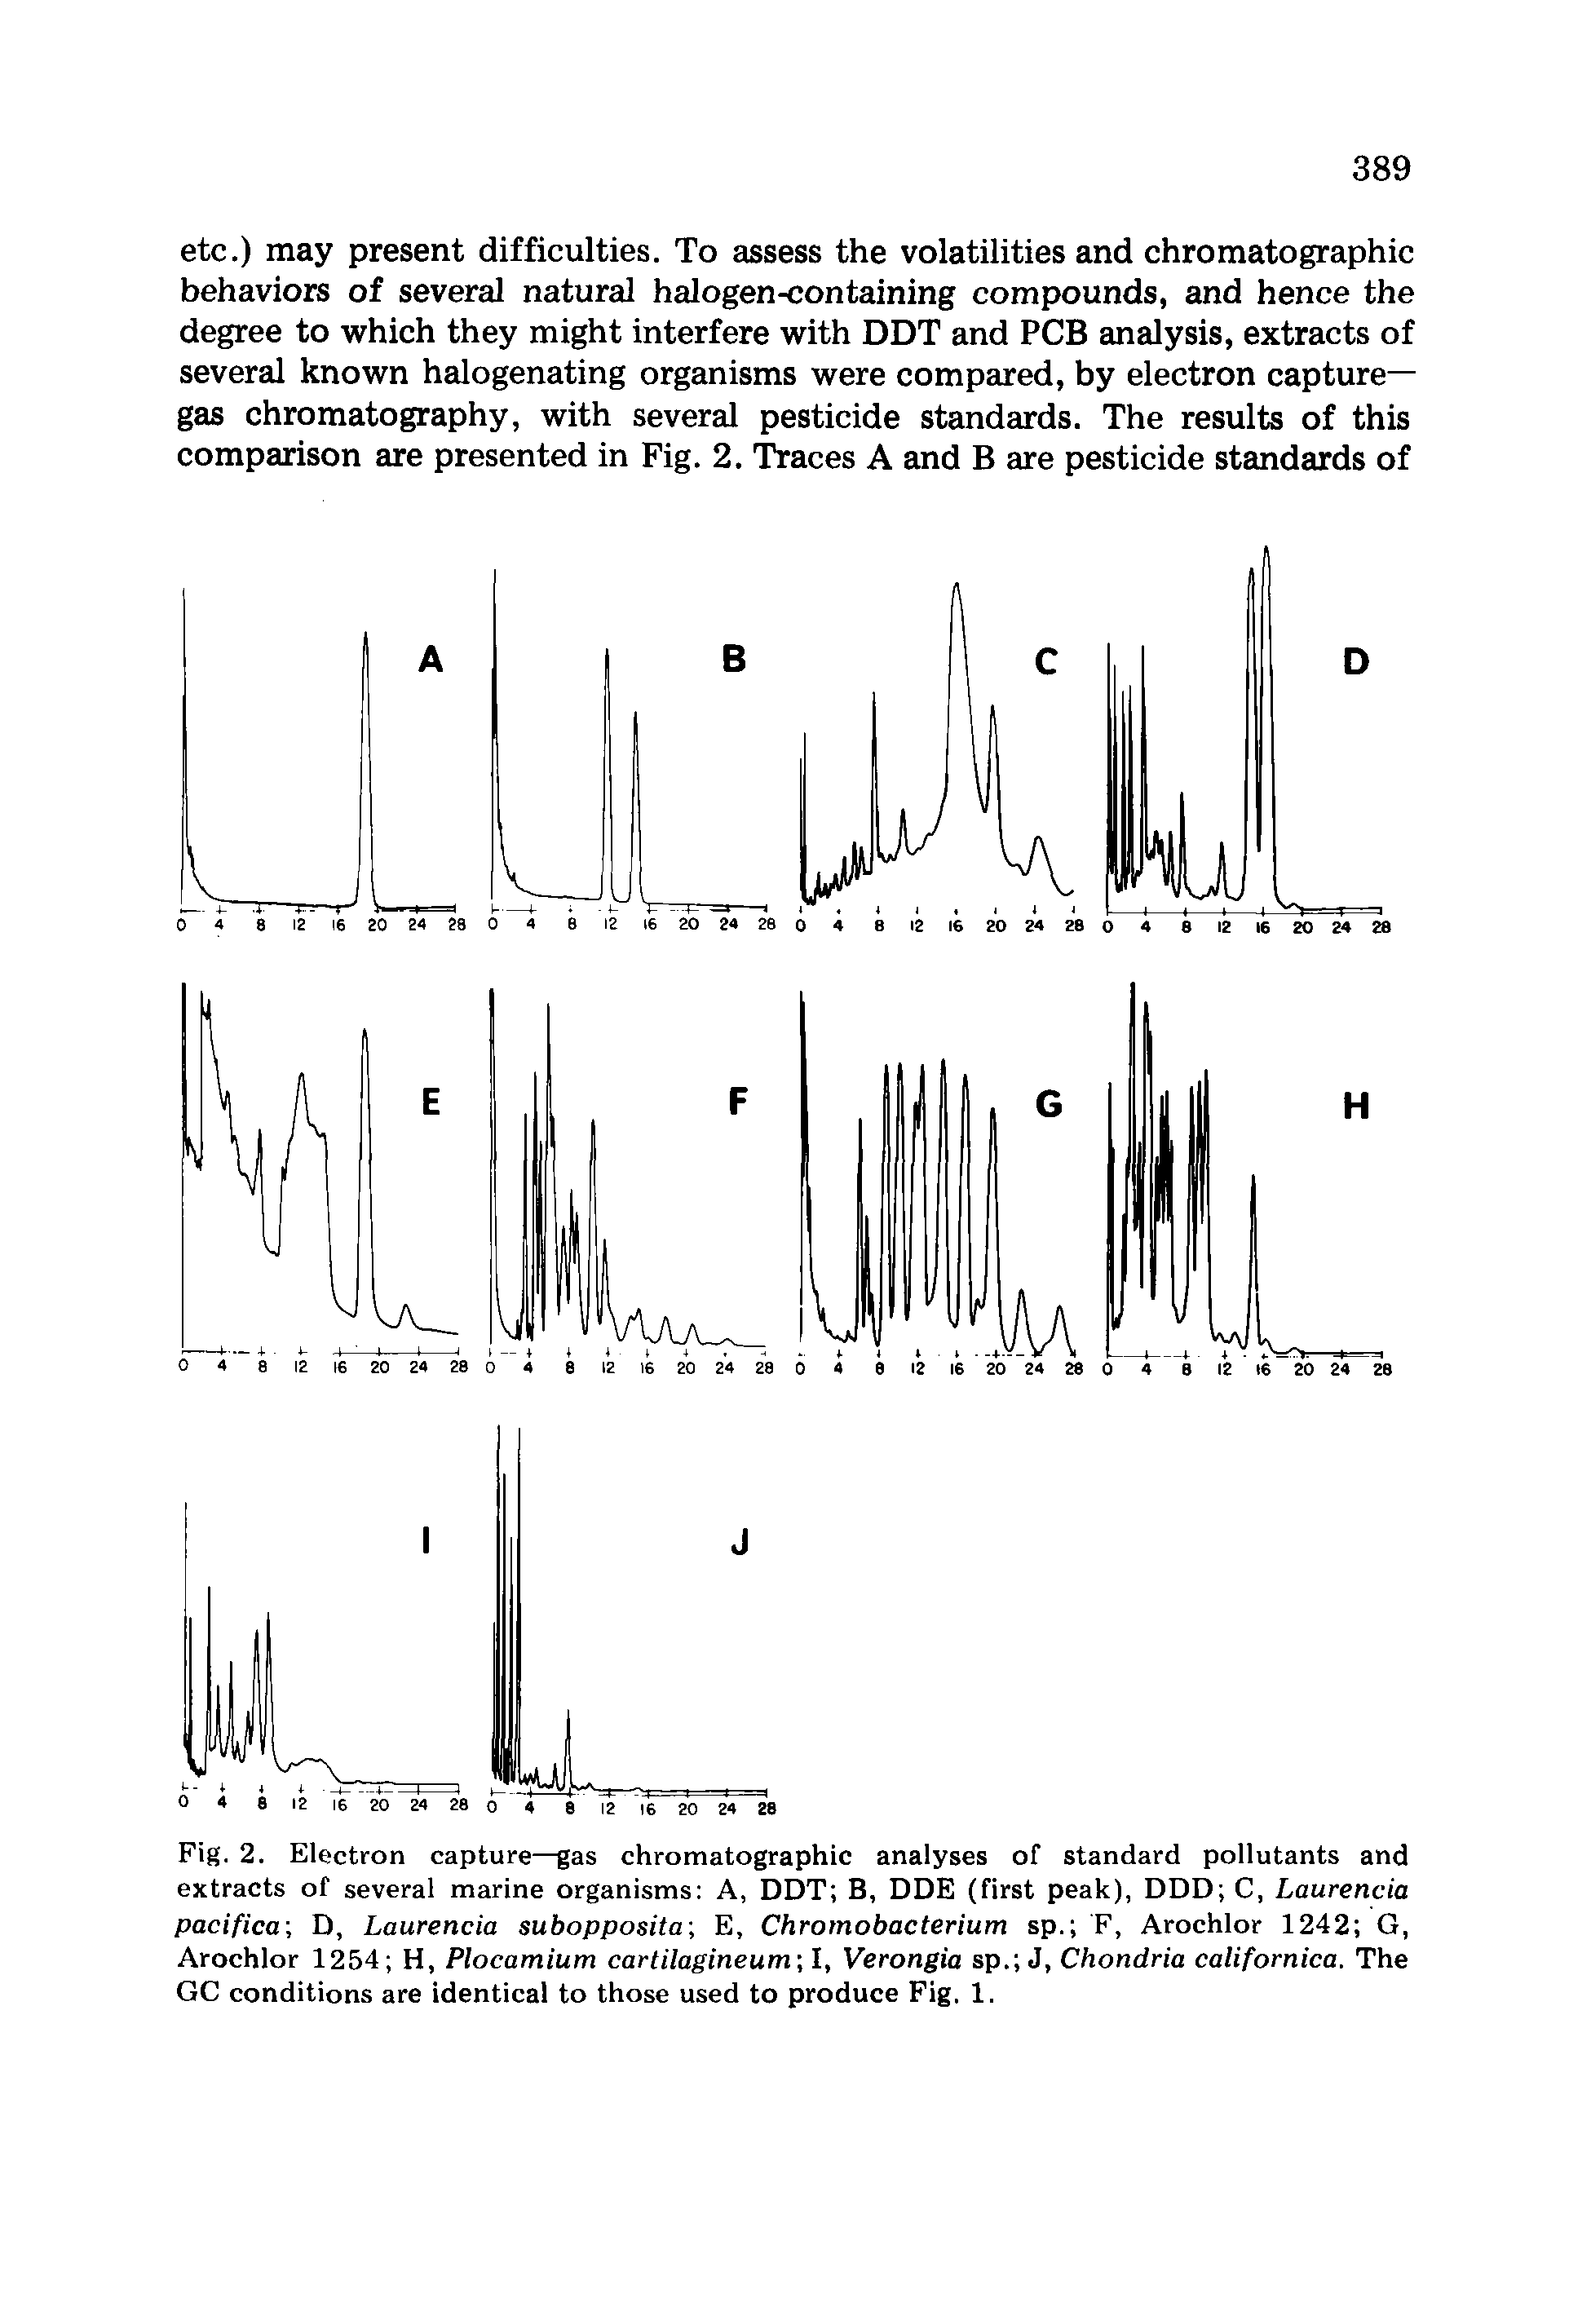 Fig. 2. Electron capture—gas chromatographic analyses of standard pollutants and extracts of several marine organisms A, DDT B, DDE (first peak), DDD C, Laurencia pacifica-, D, Laurencia subopposita E, Chromobacterium sp. F, Arochlor 1242 G, Arochlor 1254 H, Plocamium cartilagineum I, Verongia sp. J, Chondria californica. The GC conditions are identical to those used to produce Fig, 1.